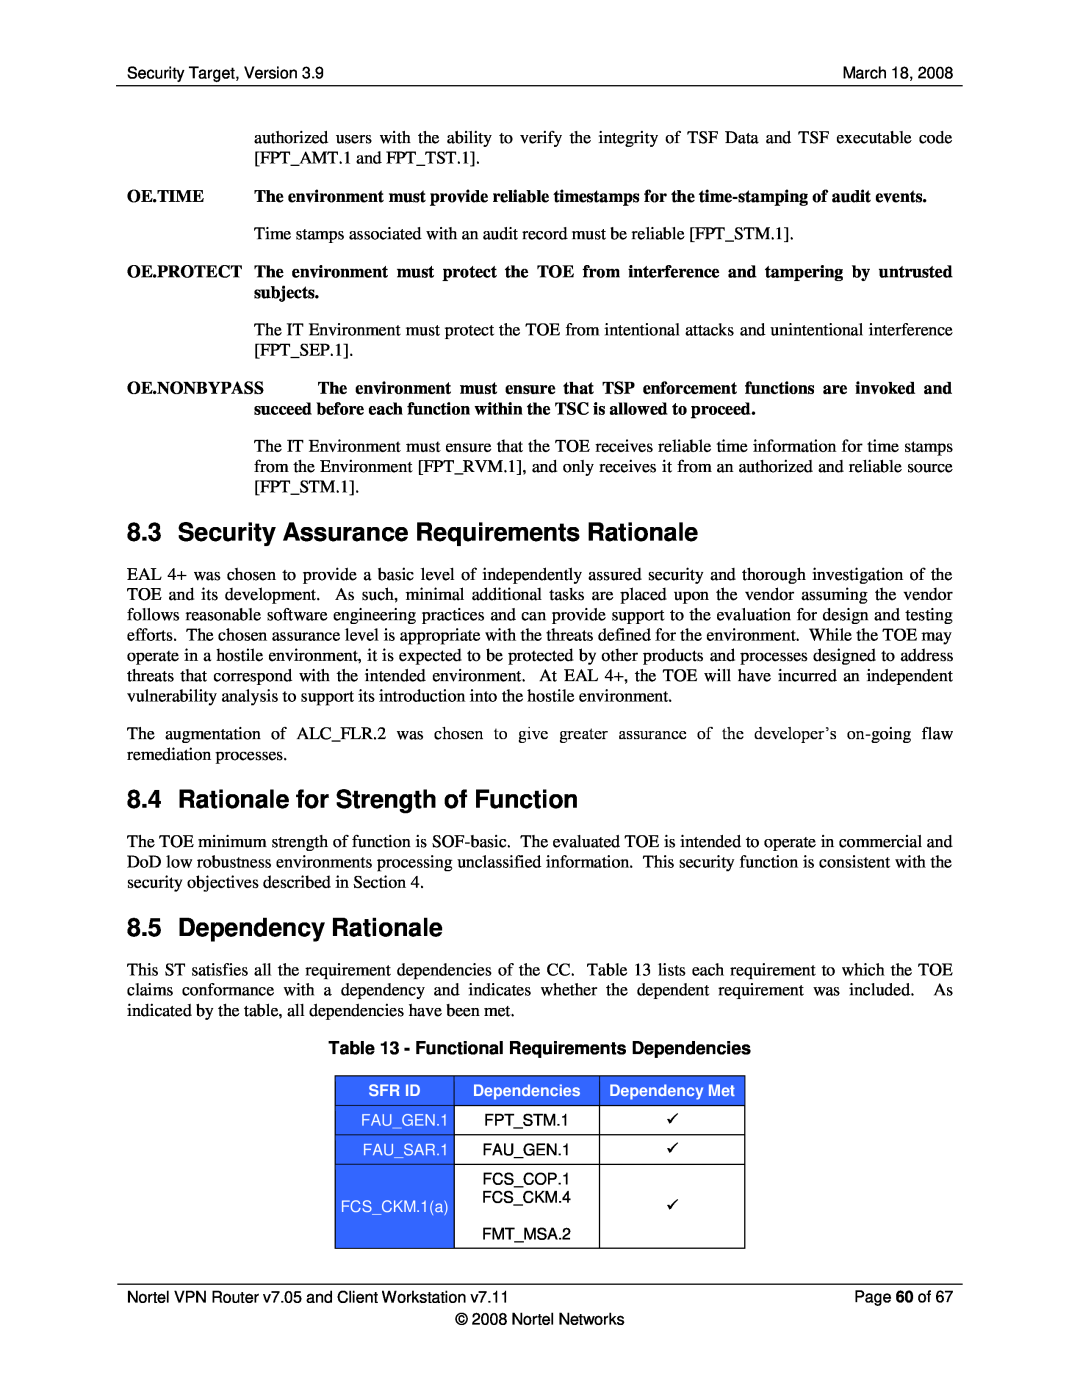 Nortel Networks 7.05 Security Assurance Requirements Rationale, Rationale for Strength of Function, Dependency Rationale 